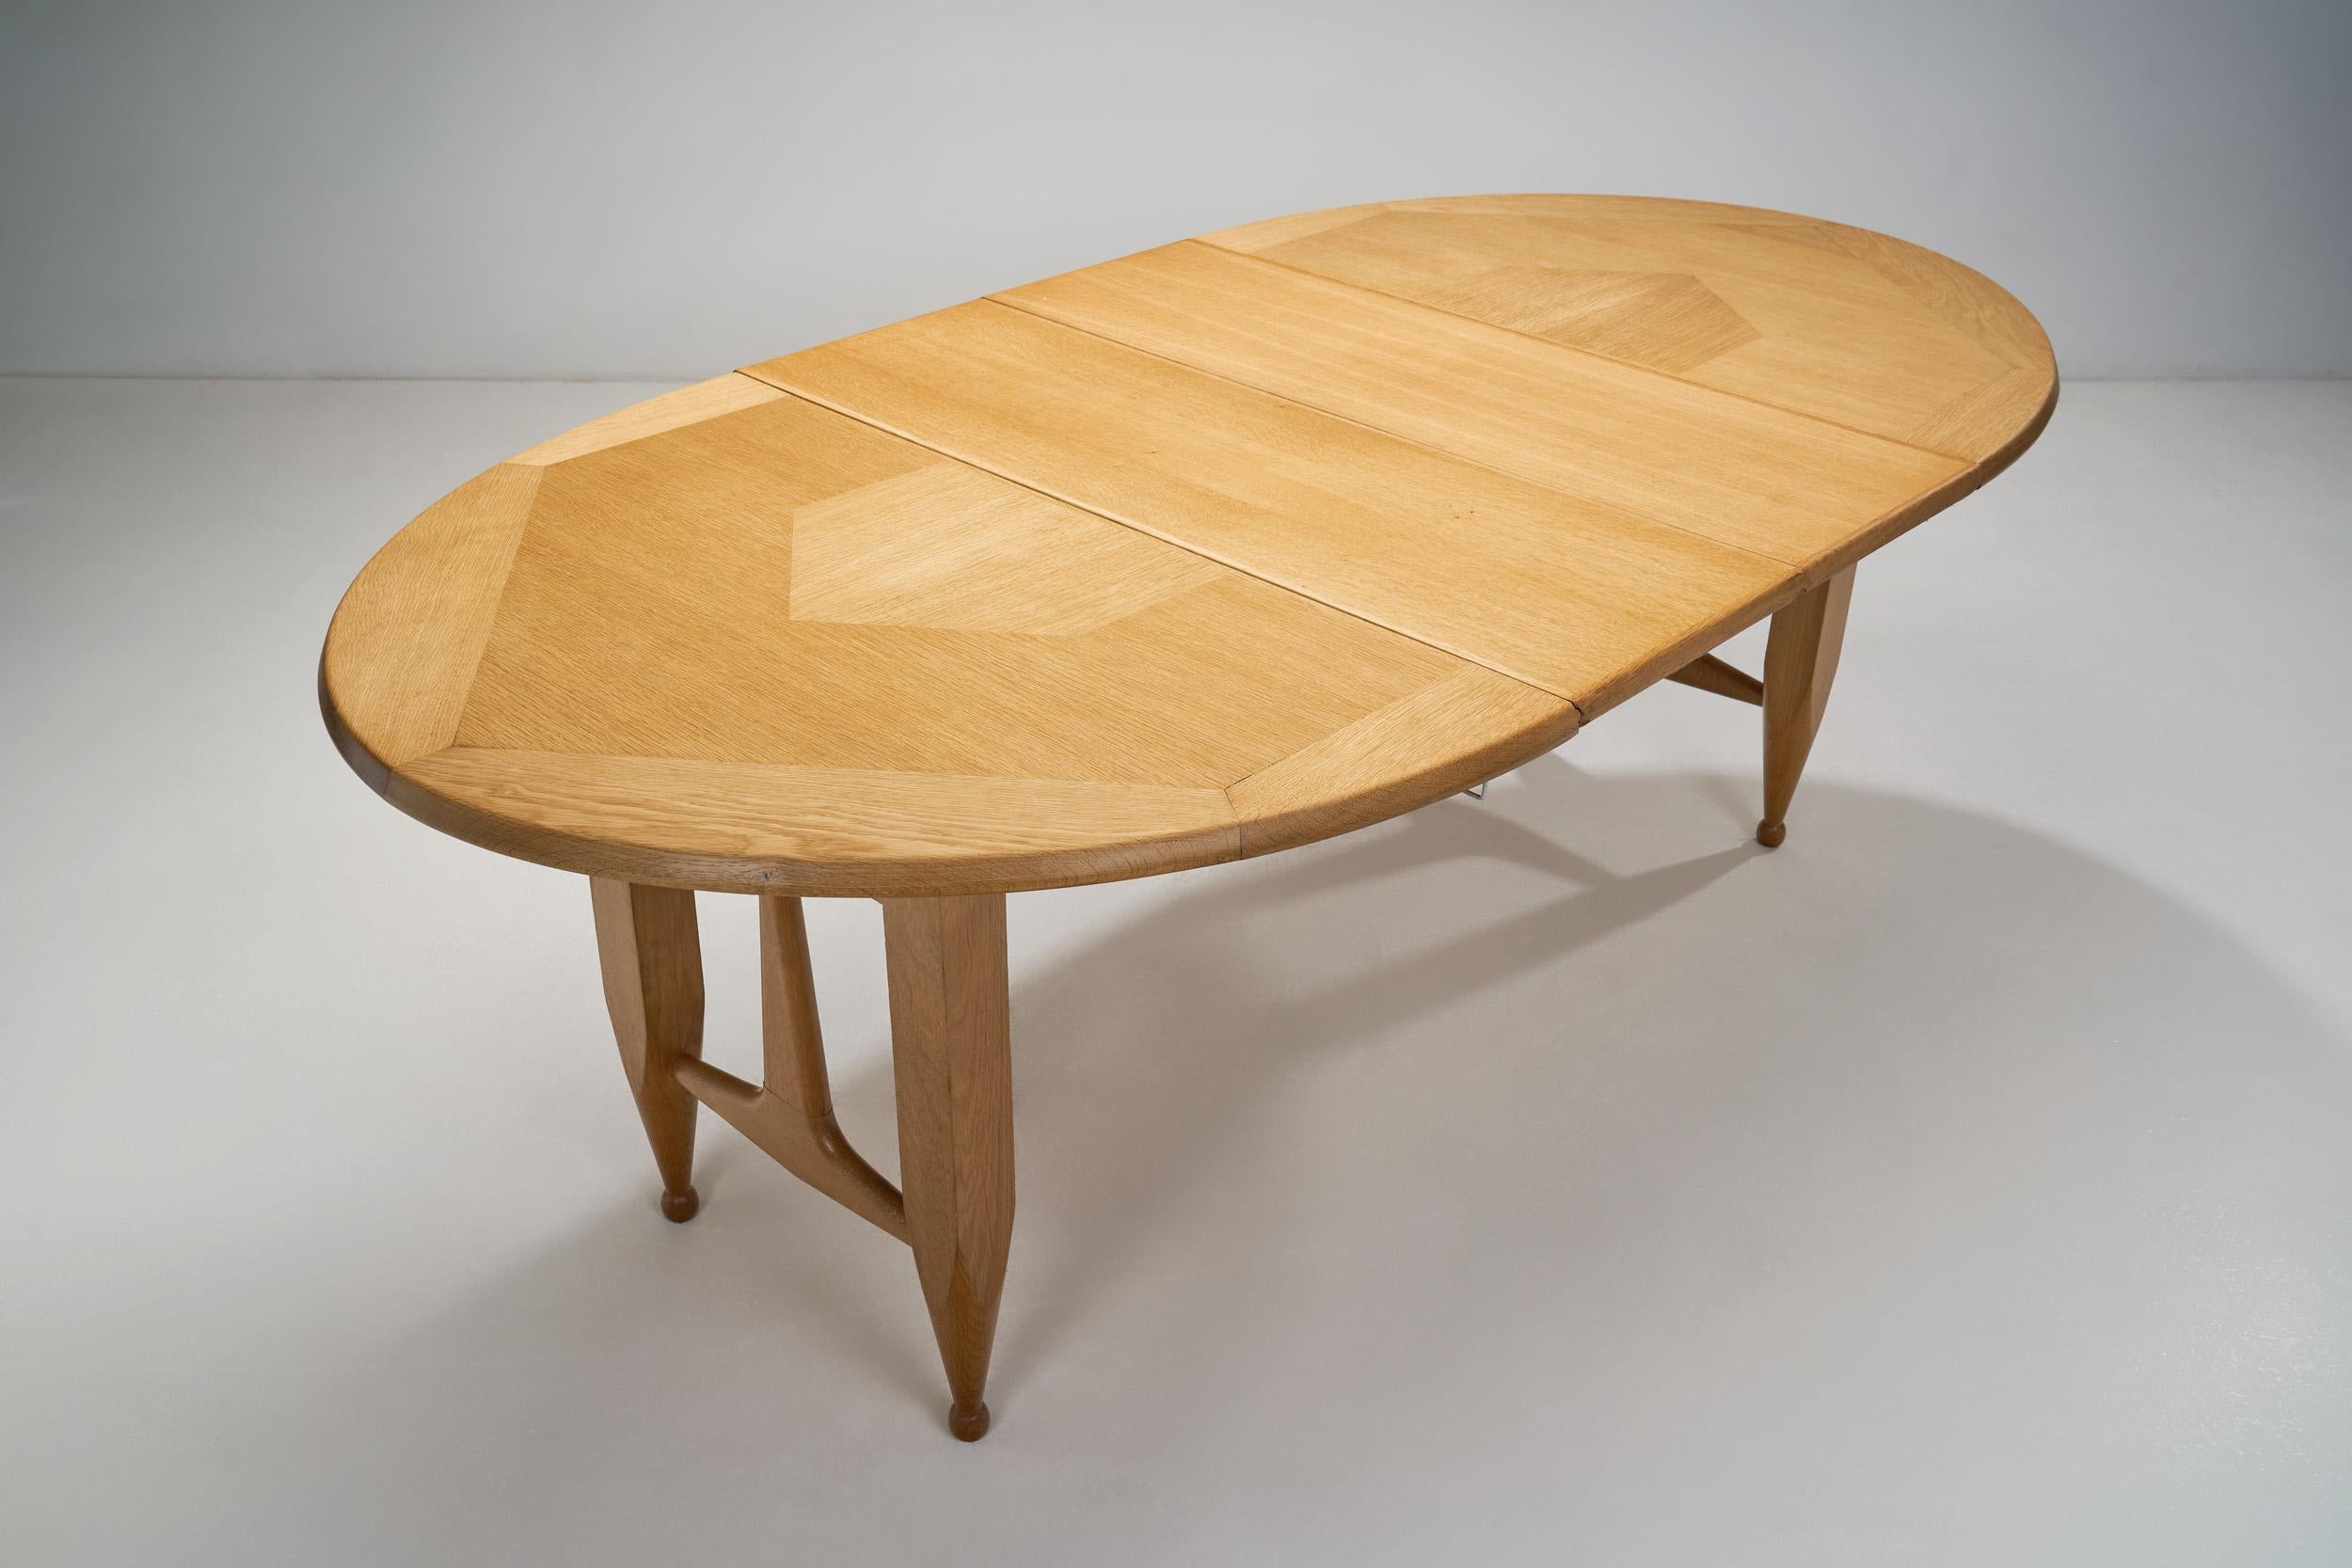 Mid-20th Century Extendable Wood and Veneer Dining Table by Guillerme et Chambron, France 1960s For Sale